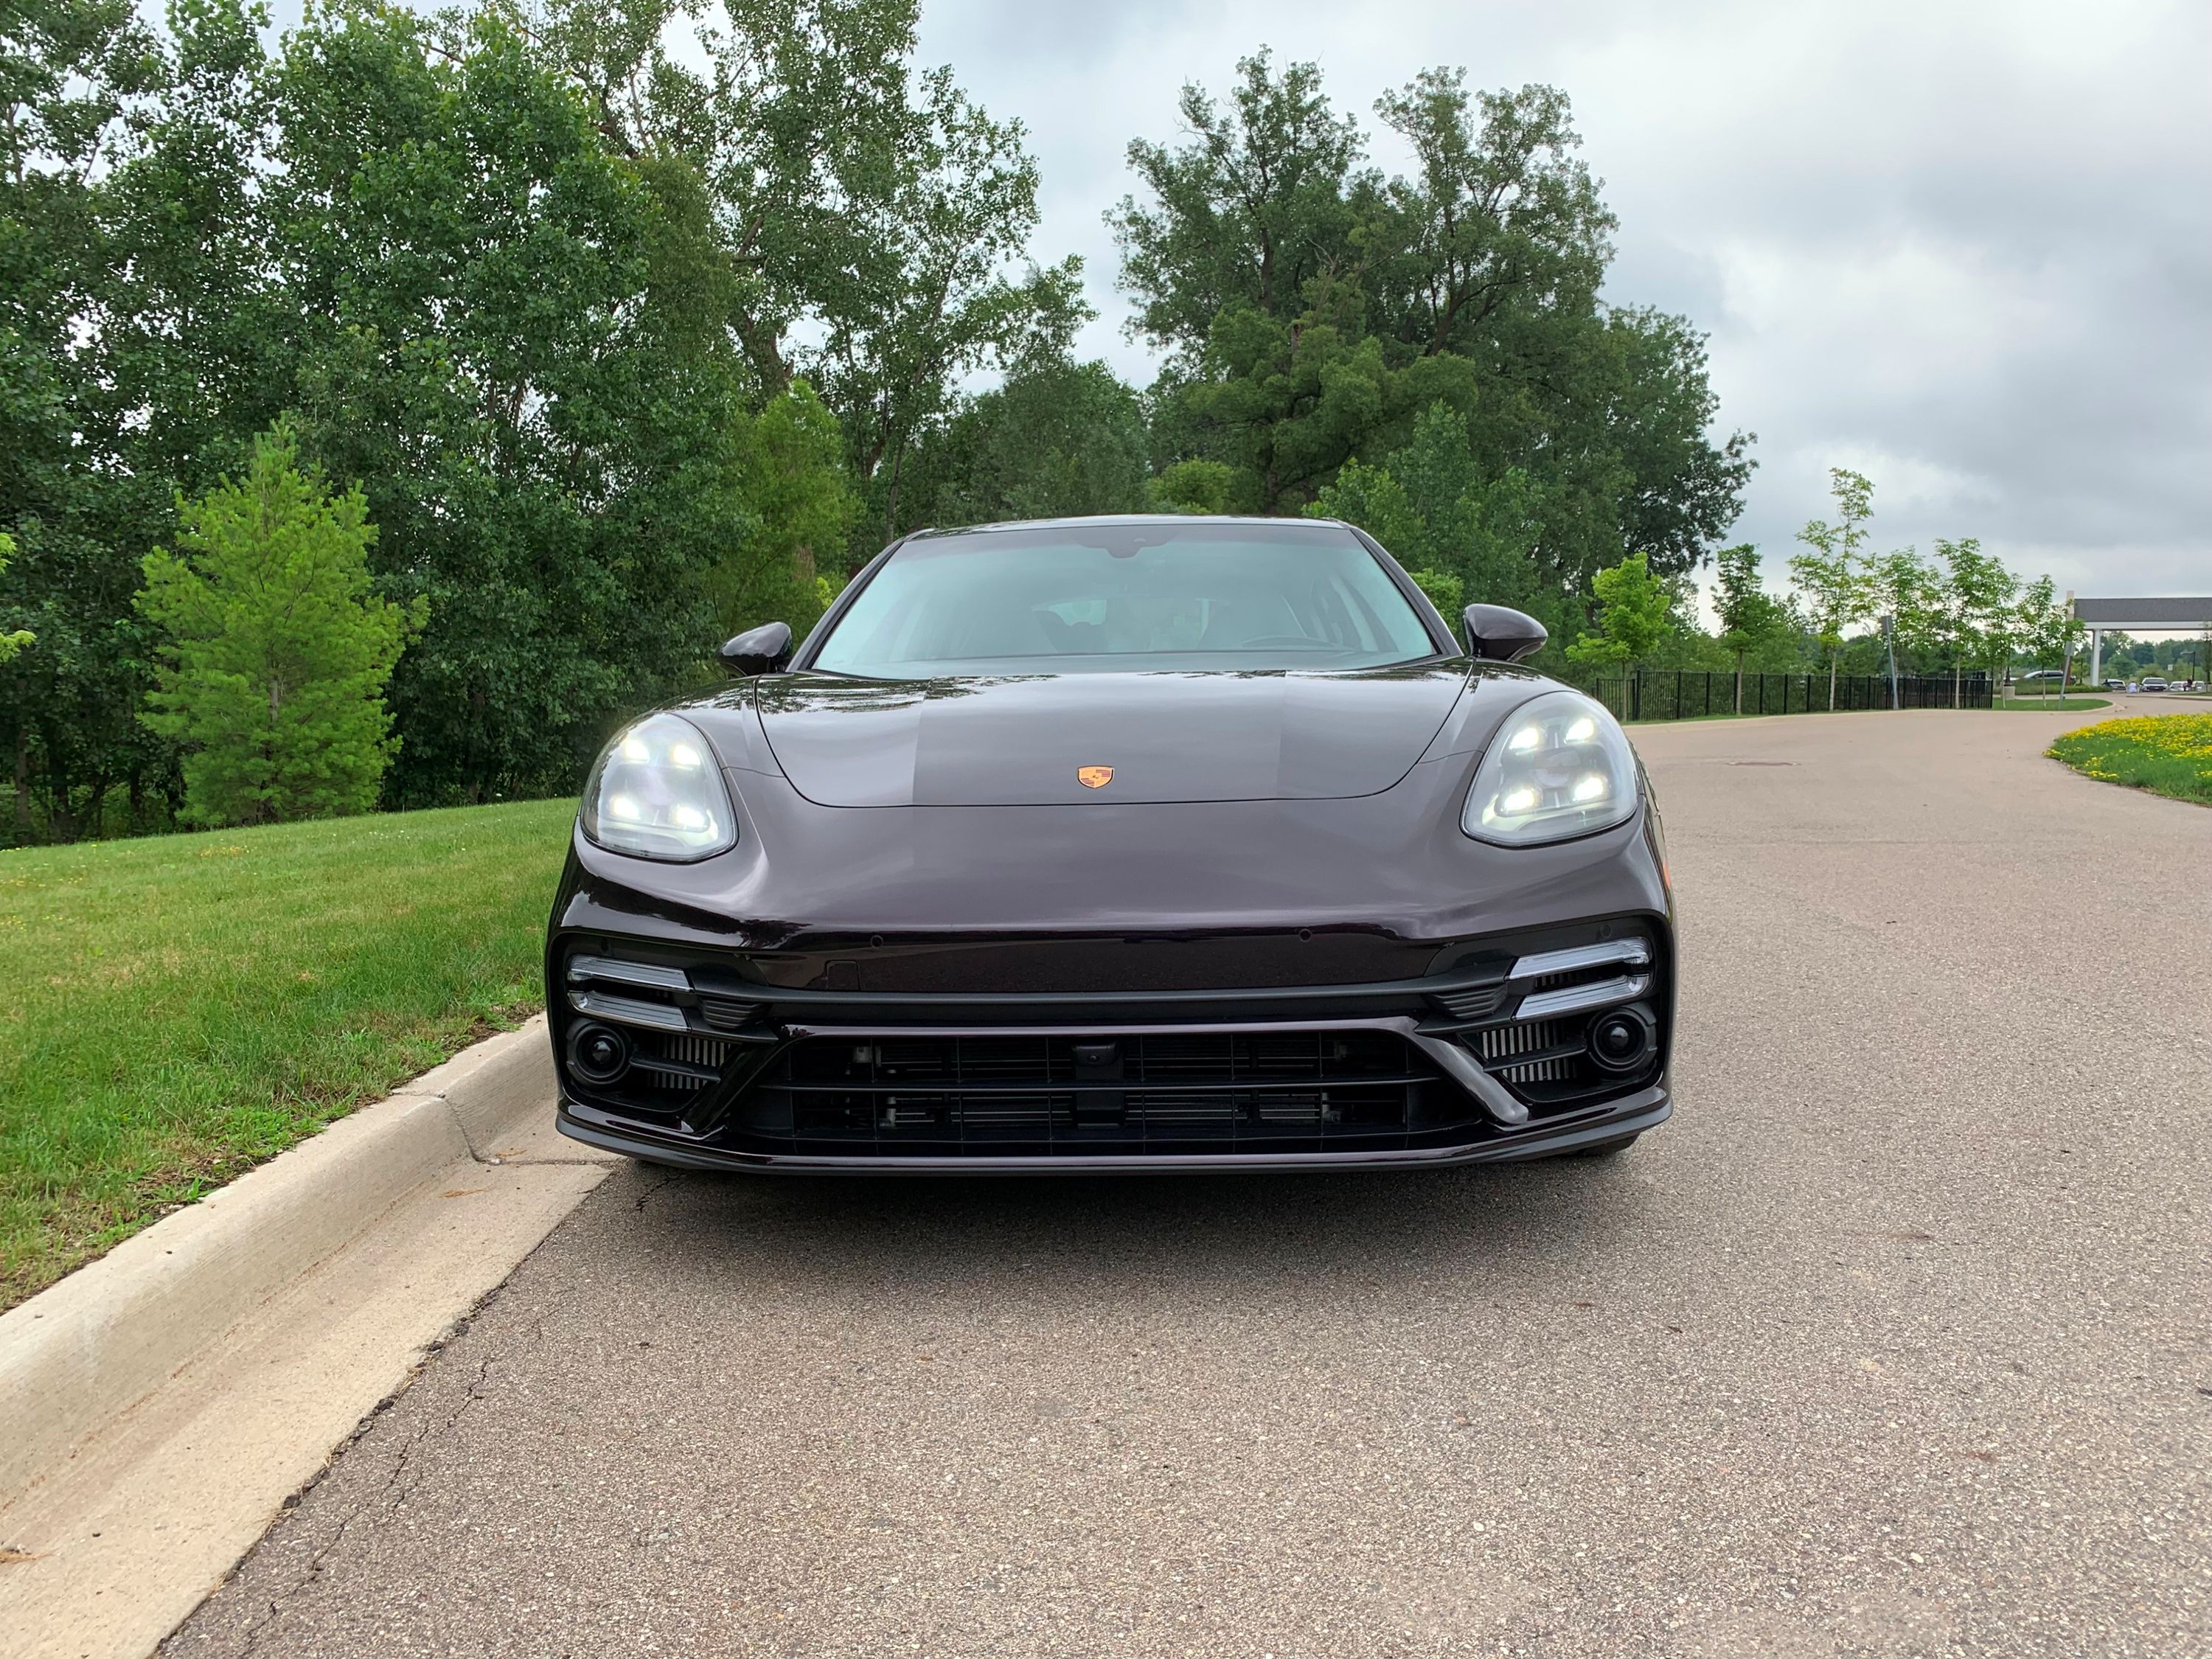 2023 Porsche Panamera - News, reviews, picture galleries and